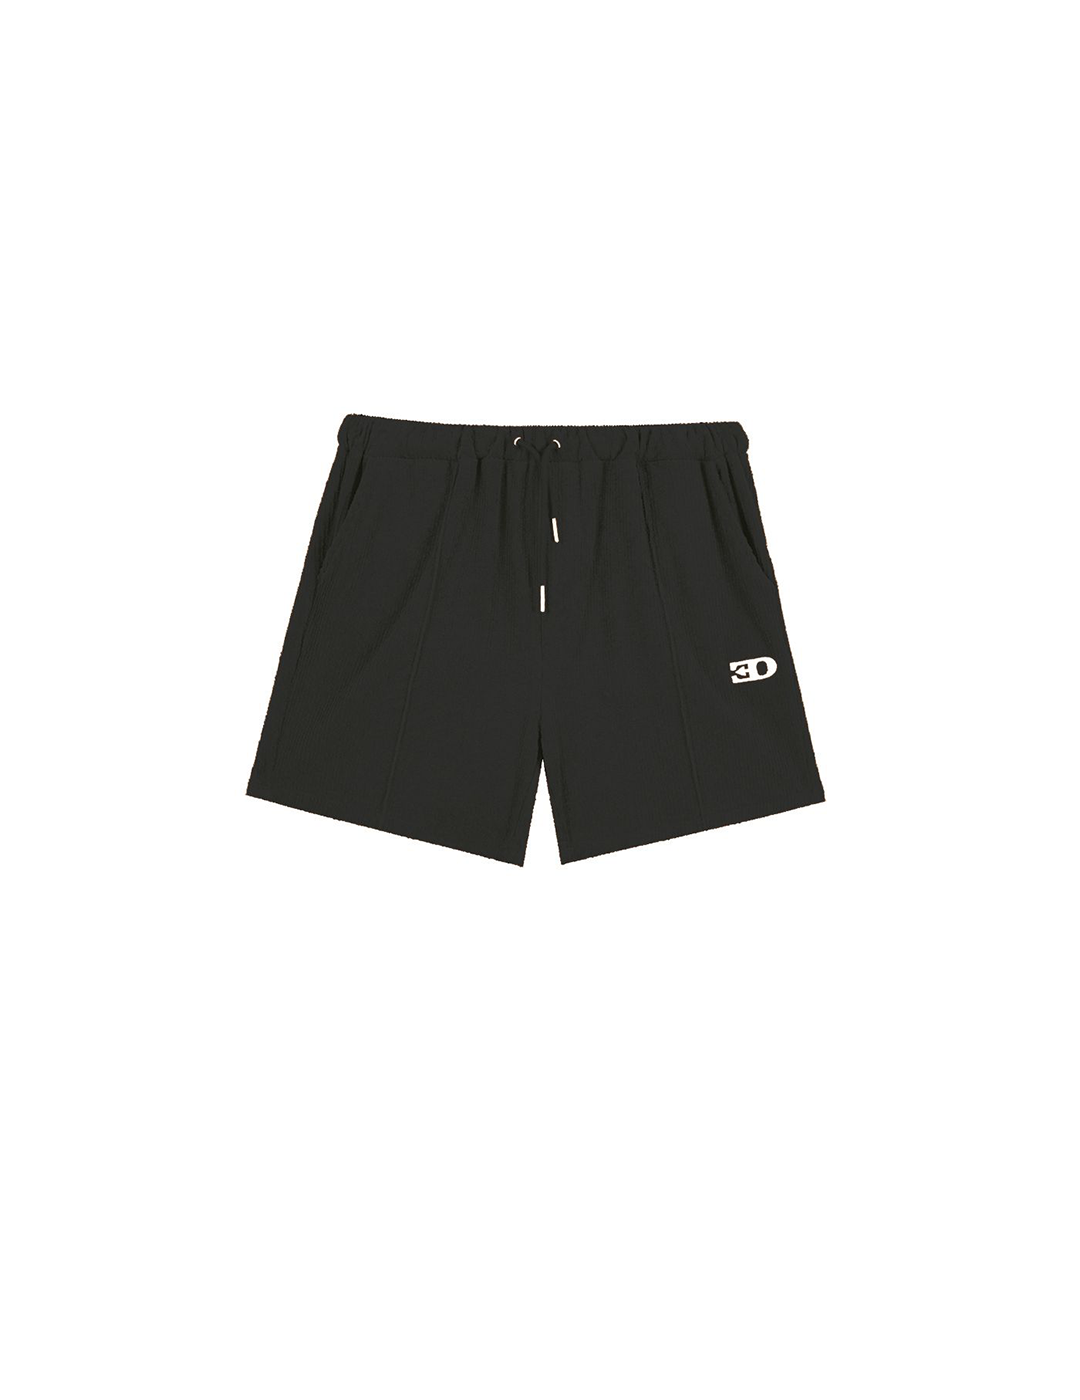 THE TRACK SHORTS IN BLACK VELOUR